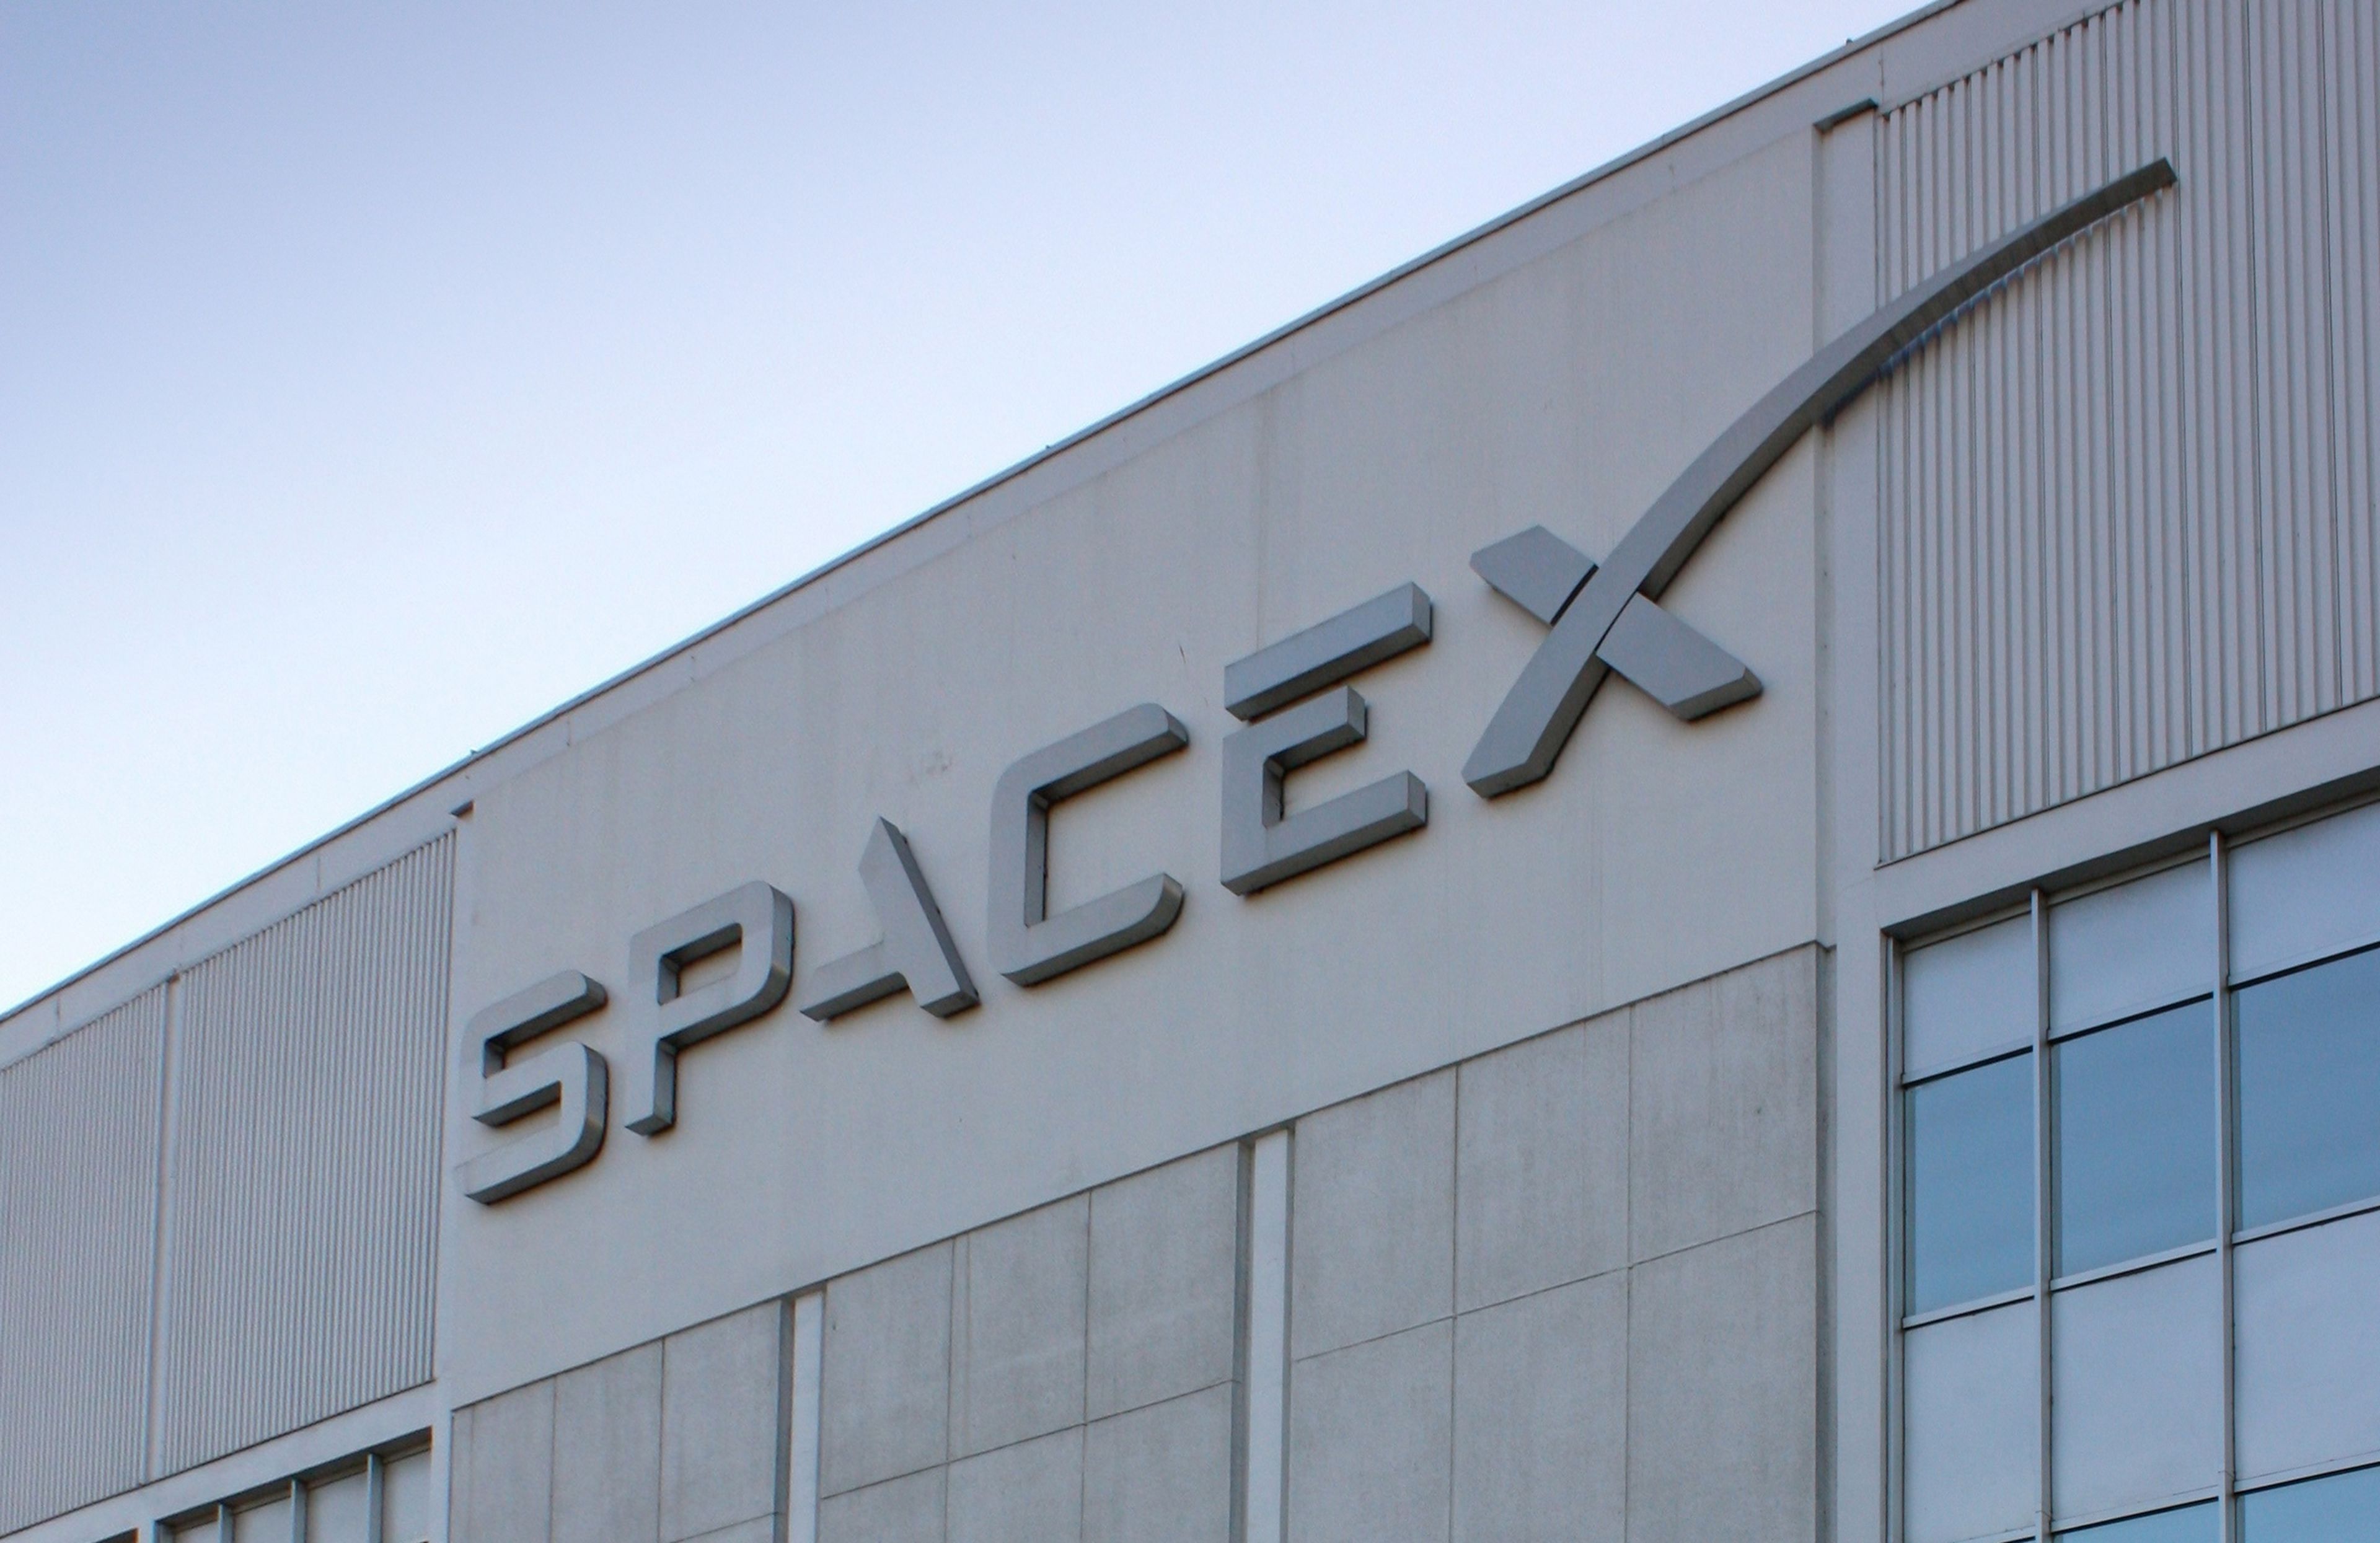 Elon Musk explains the meaning of the Tesla and SpaceX logos, and reveals some secrets